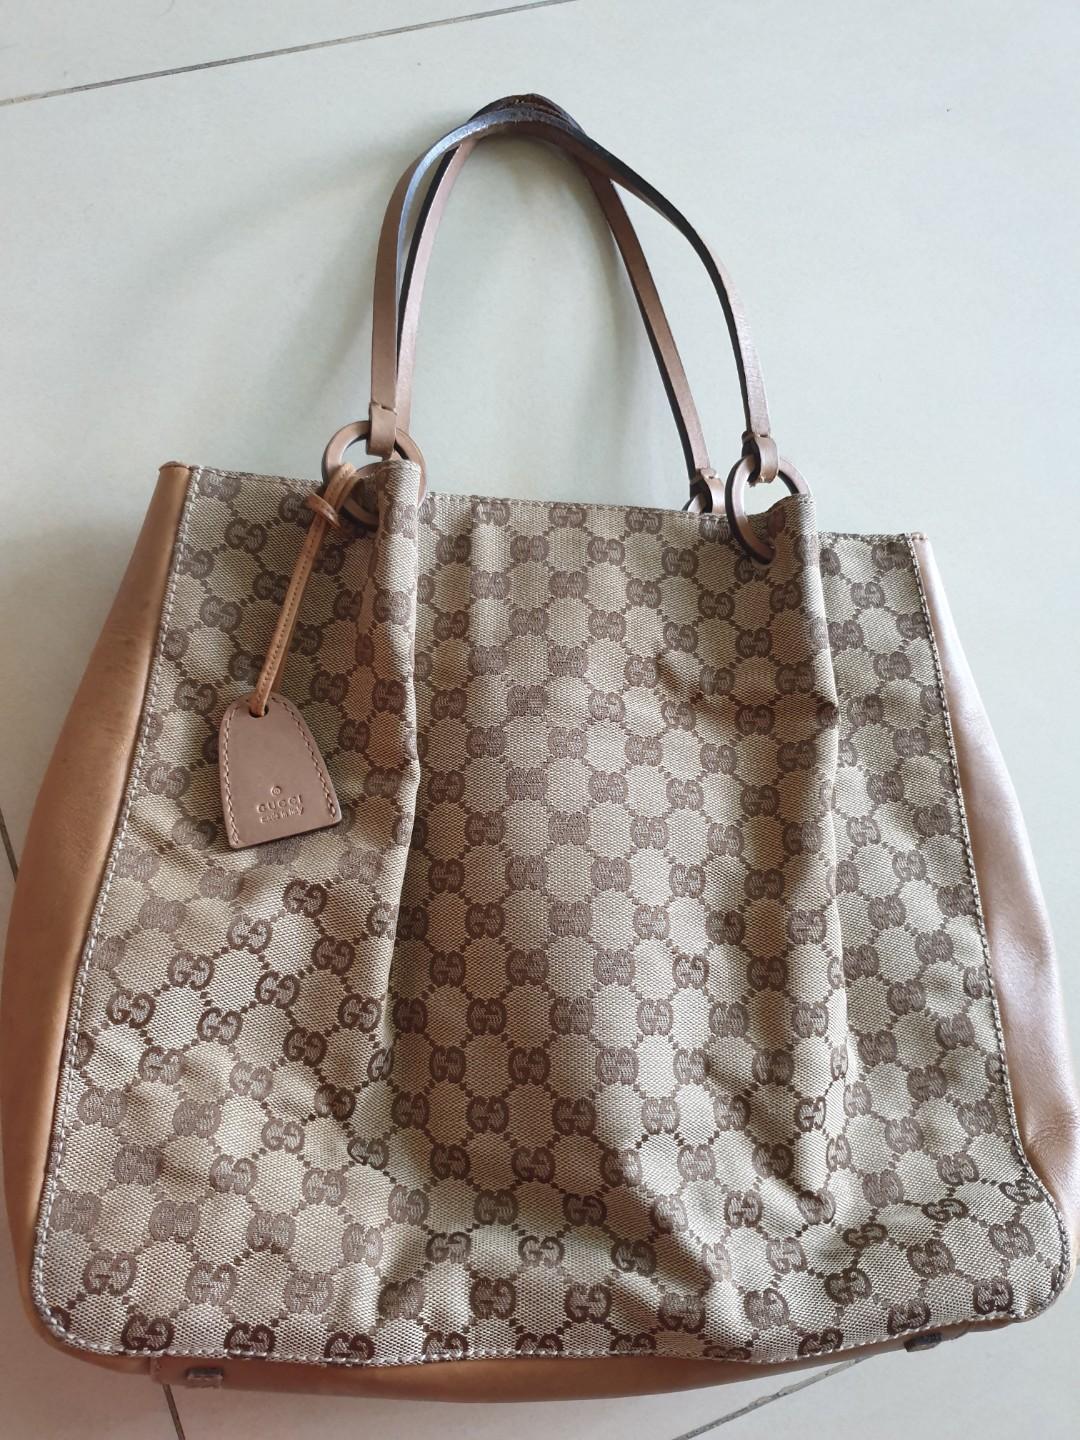 cheap authentic gucci bags